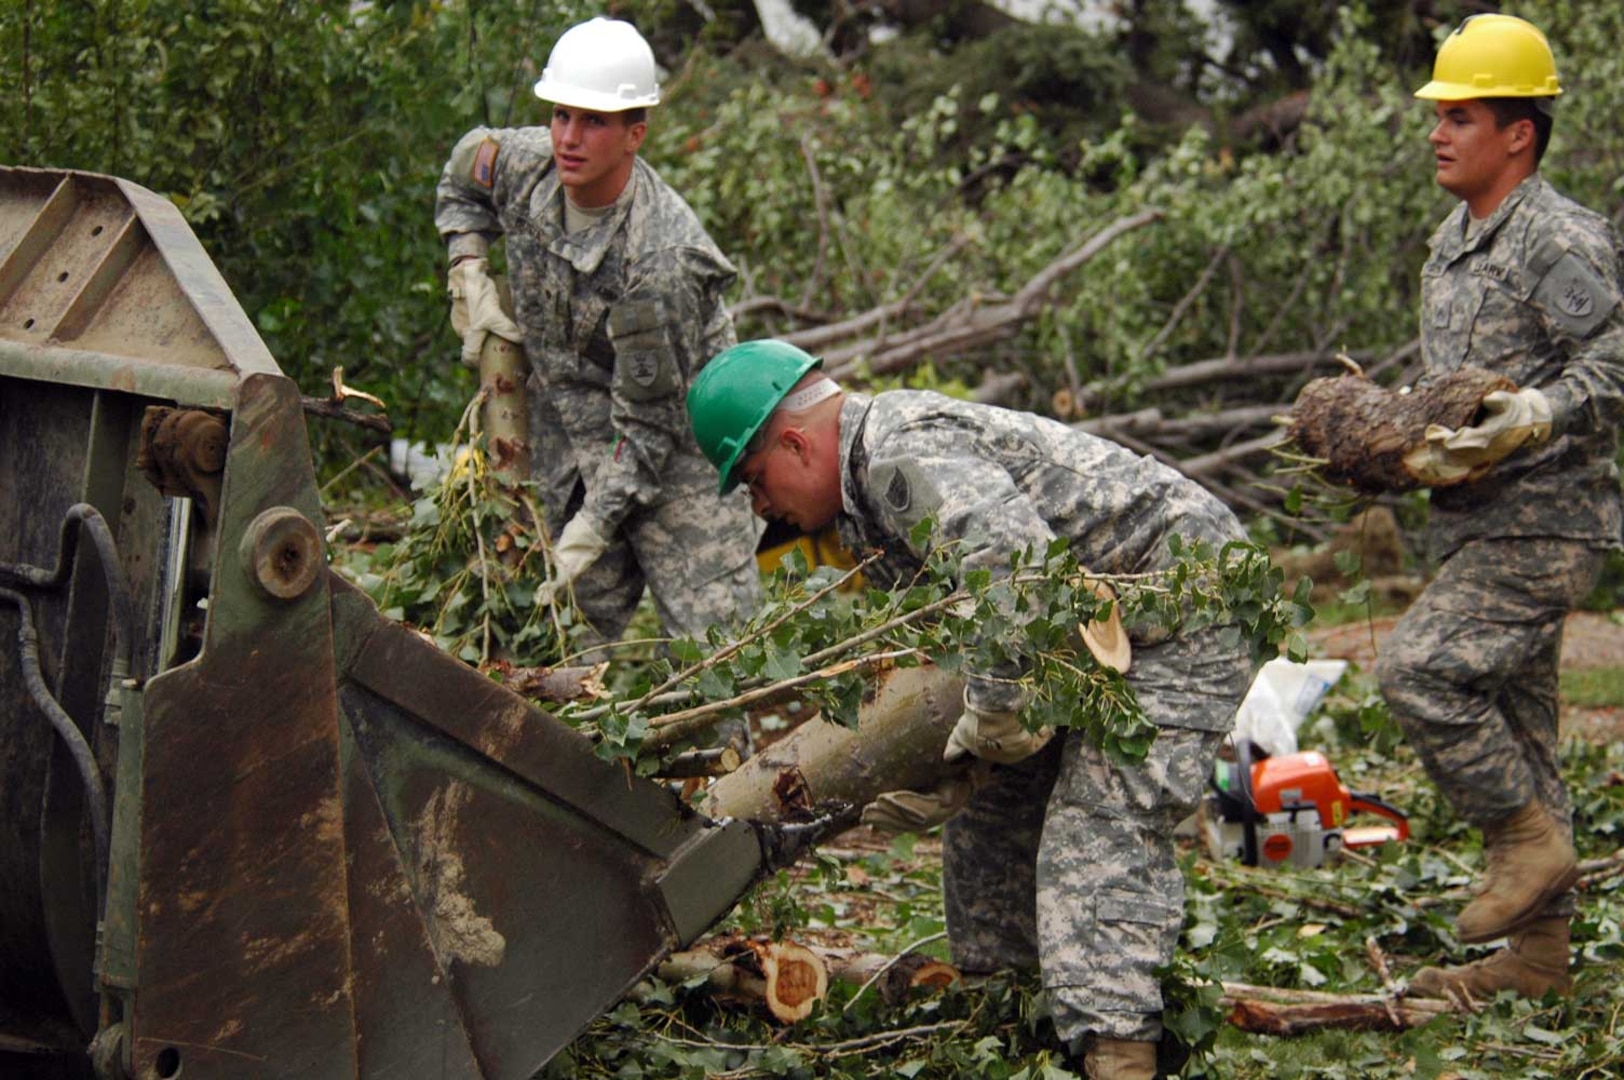 Spc. Ian Busta, Fargo, N.D., 142nd Engineer Combat Battalion; Pvt. Nathan L. Miller, Toronto, S.D., Detachment 2 of the 815th Engineer Company, and Pvt. Kevin J. Iverson, Breckenridge, Minn., 188th Engineer Company, work at clearing downed trees and debris left behind by an F4 tornado that hit Northwood, N.D. on the night of Sunday, Aug. 26.